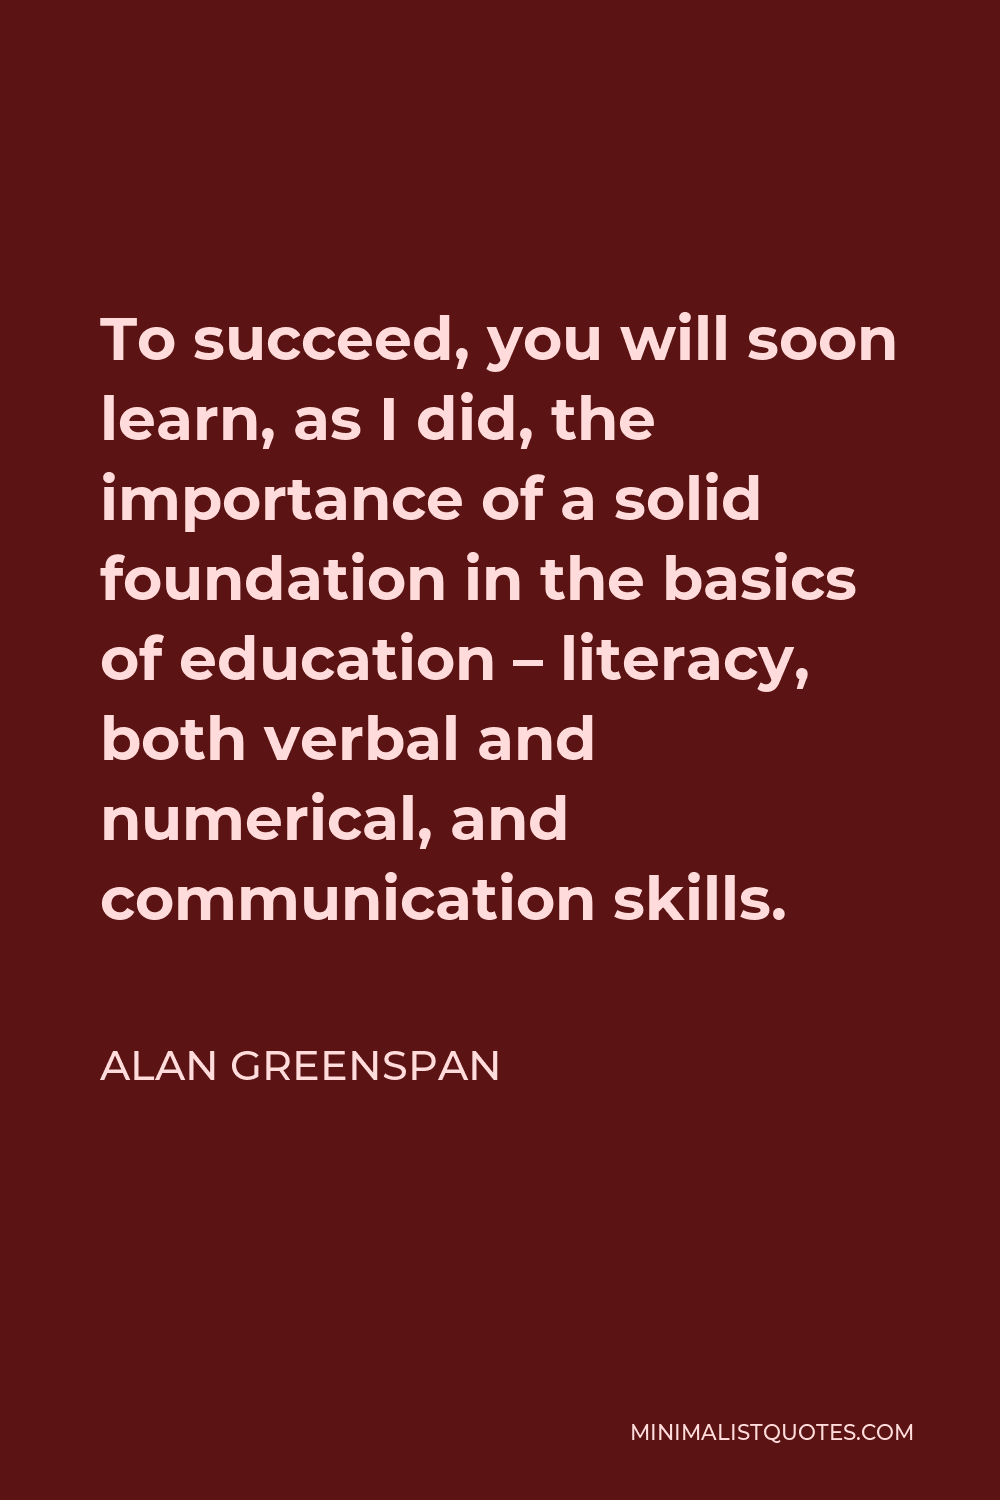 Alan Greenspan Quote - To succeed, you will soon learn, as I did, the importance of a solid foundation in the basics of education – literacy, both verbal and numerical, and communication skills.